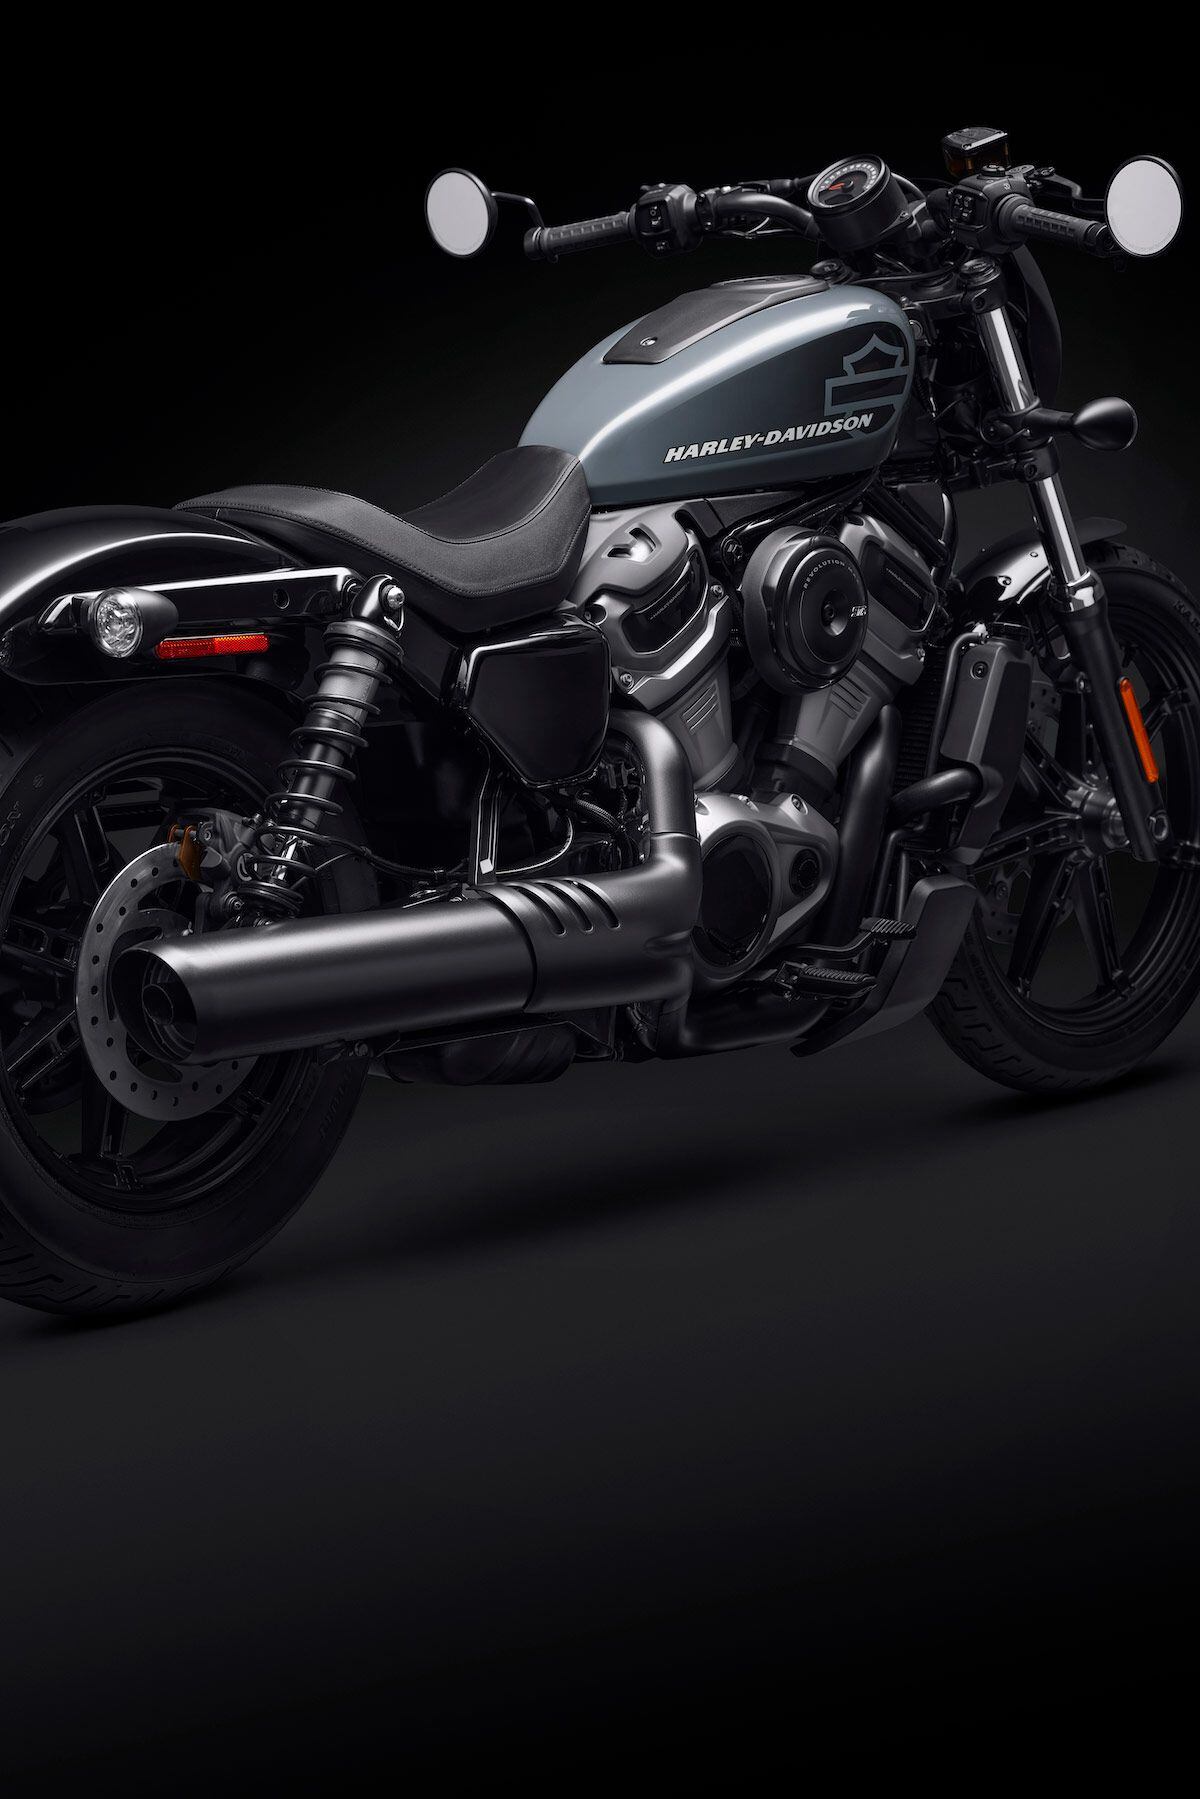 A 2-into-1 exhaust hints at added power; round airbox and airbox “tank” evoke classic Sportster styling.